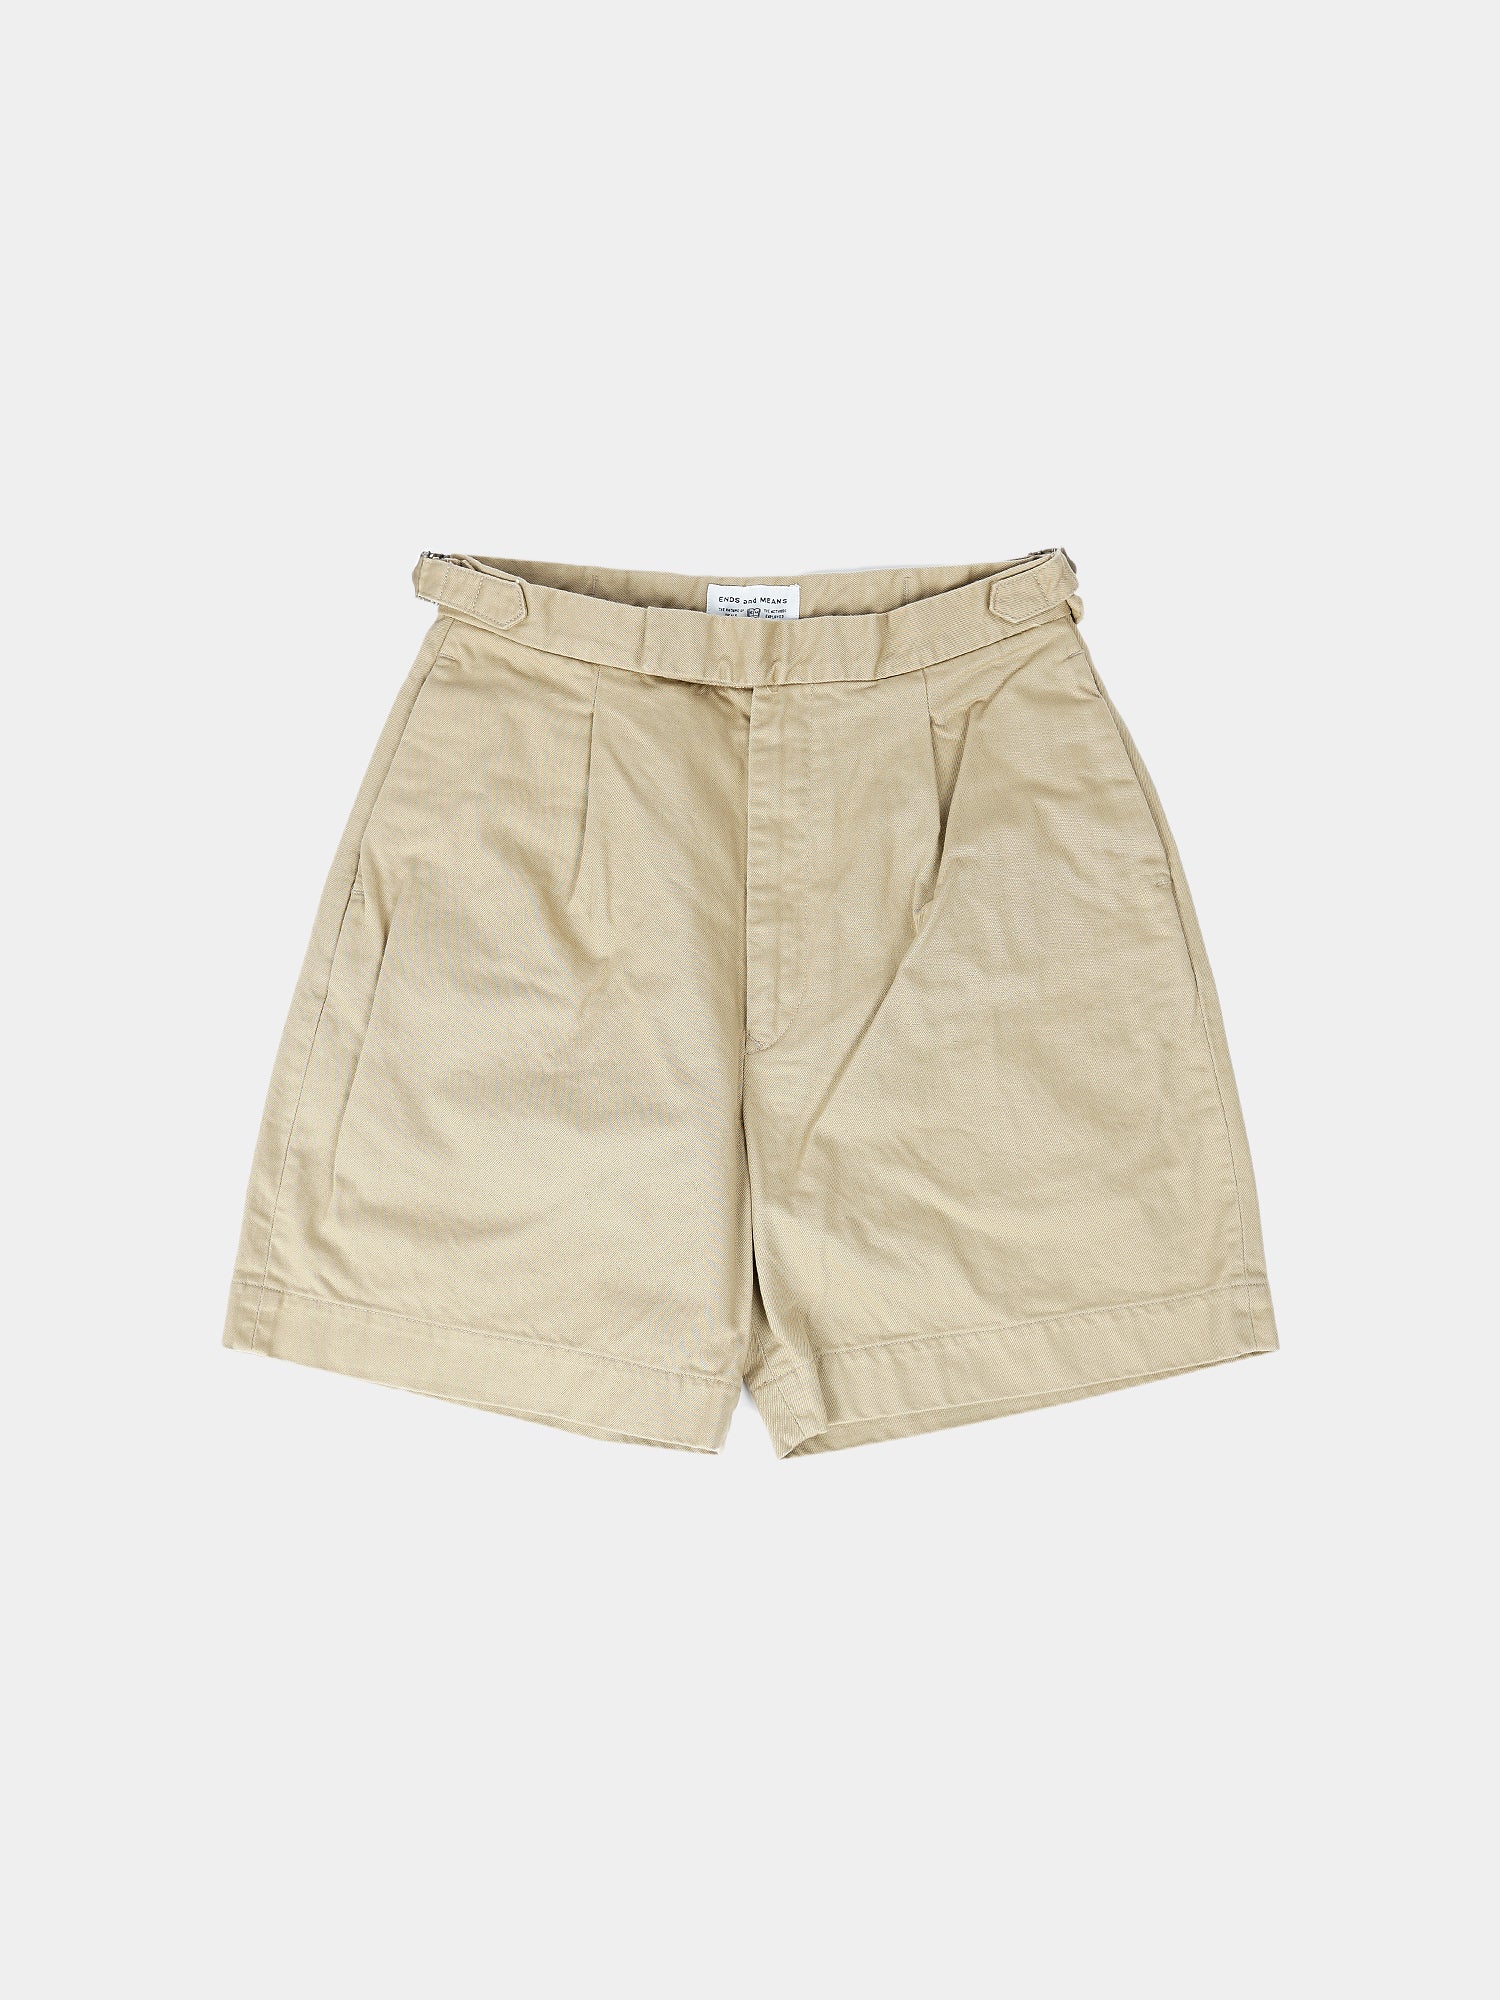 ENDS and MEANS / Easy Twill Shorts 新品